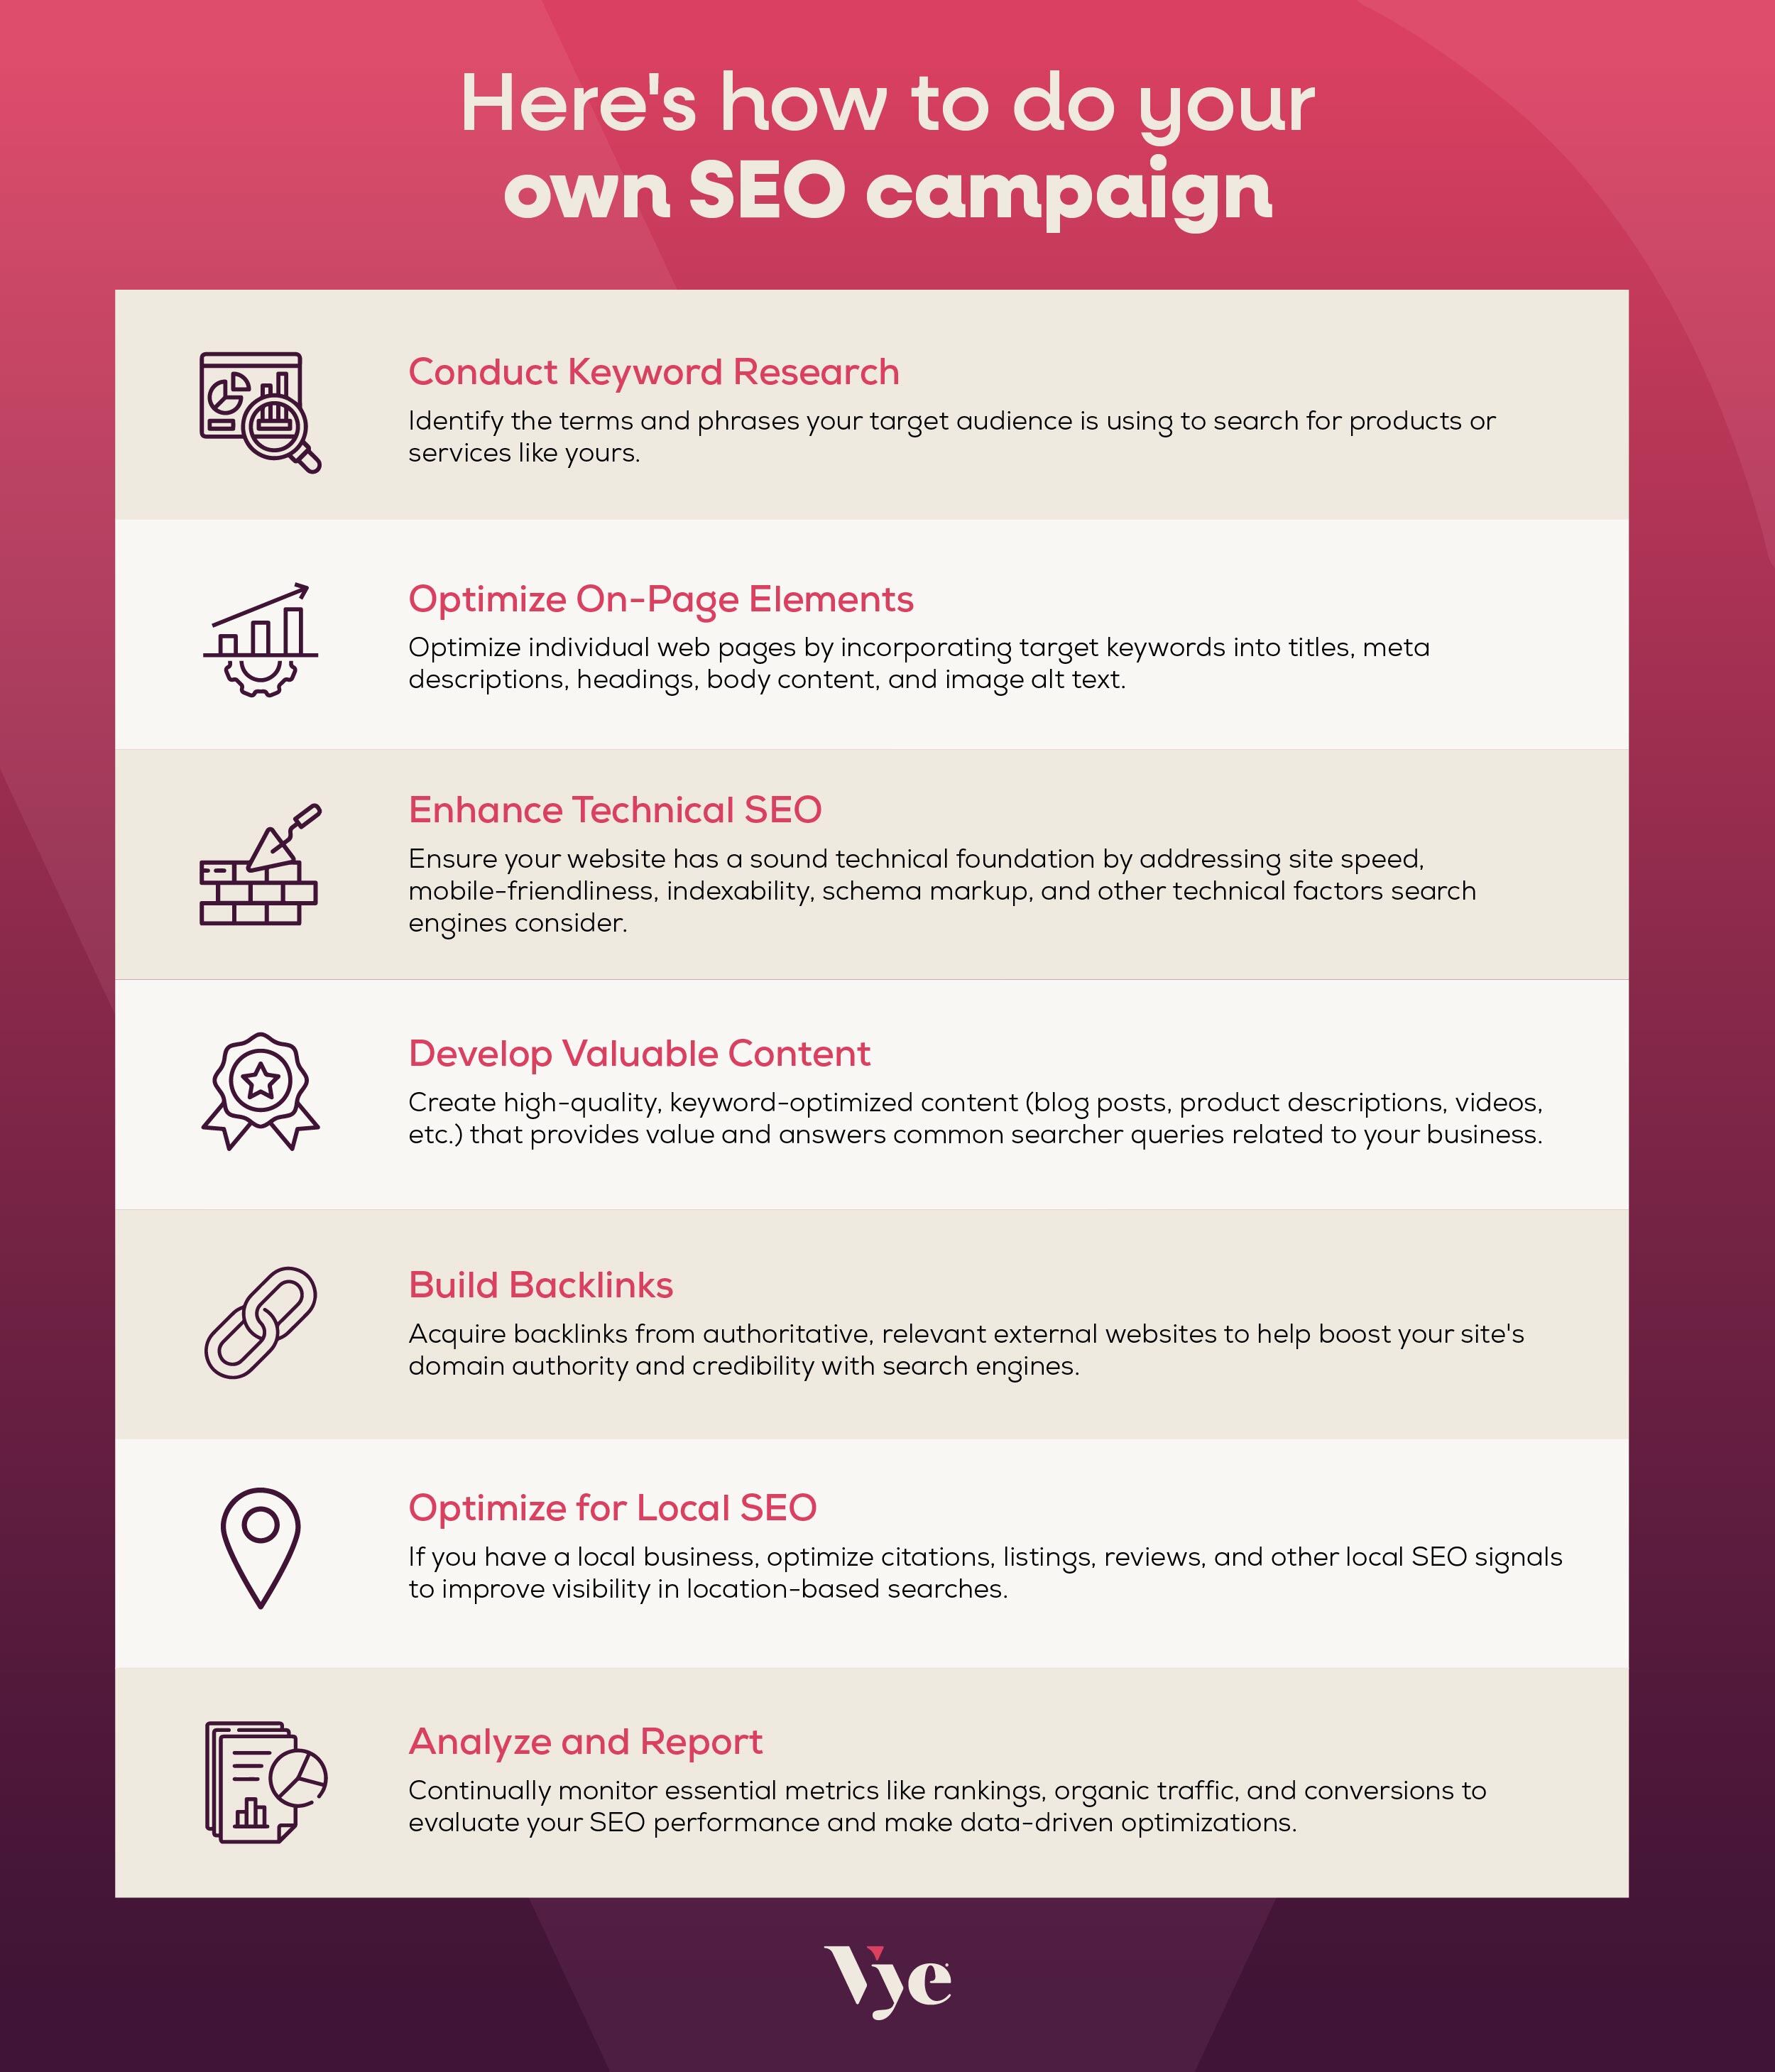 how-to-do-your-own-SEO-campaign-infographic